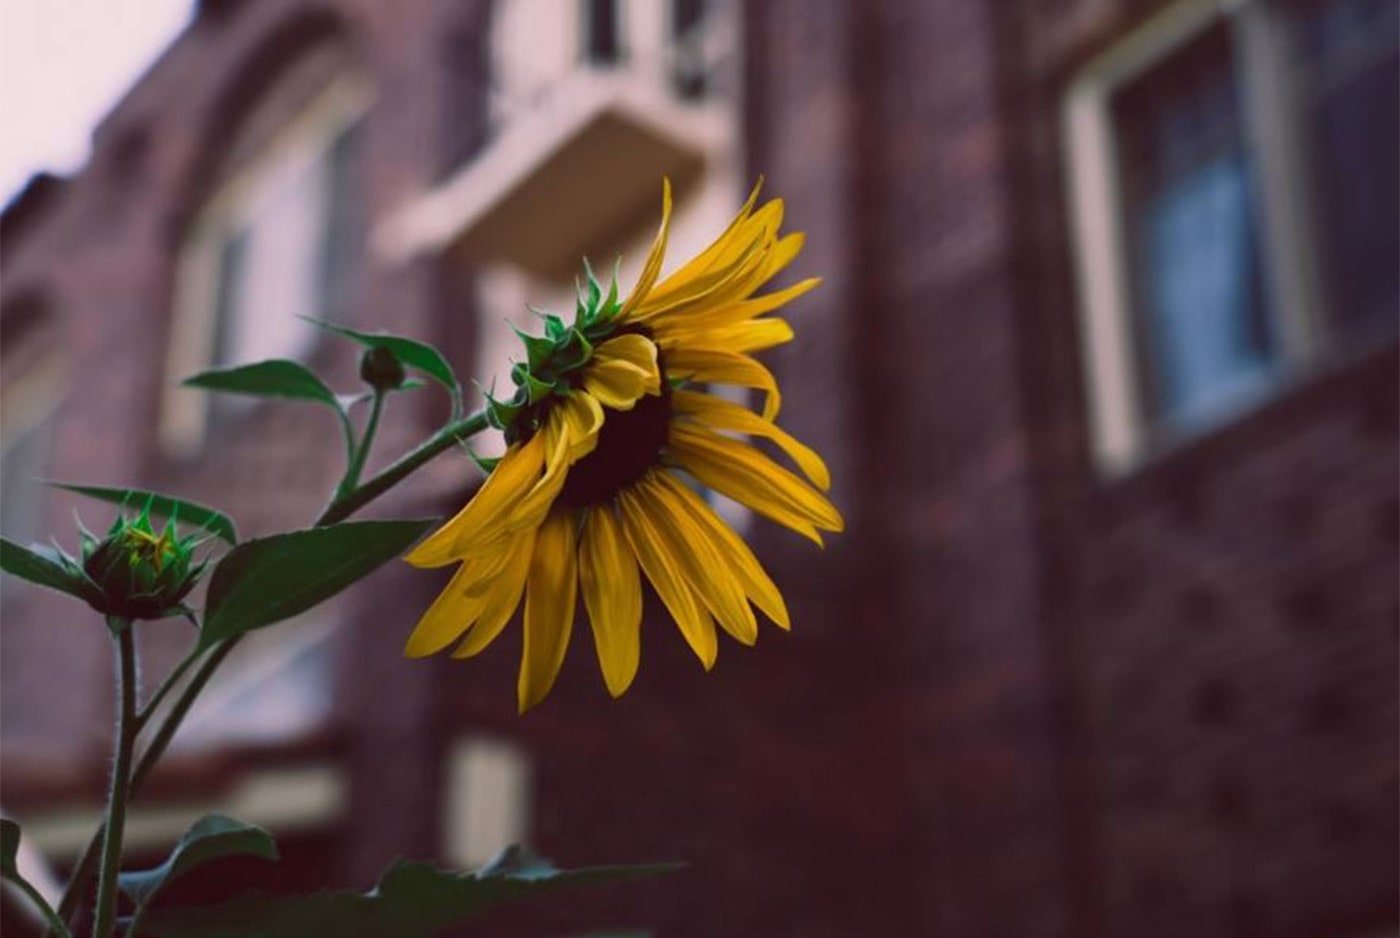 Sunflower in front of red brick building.